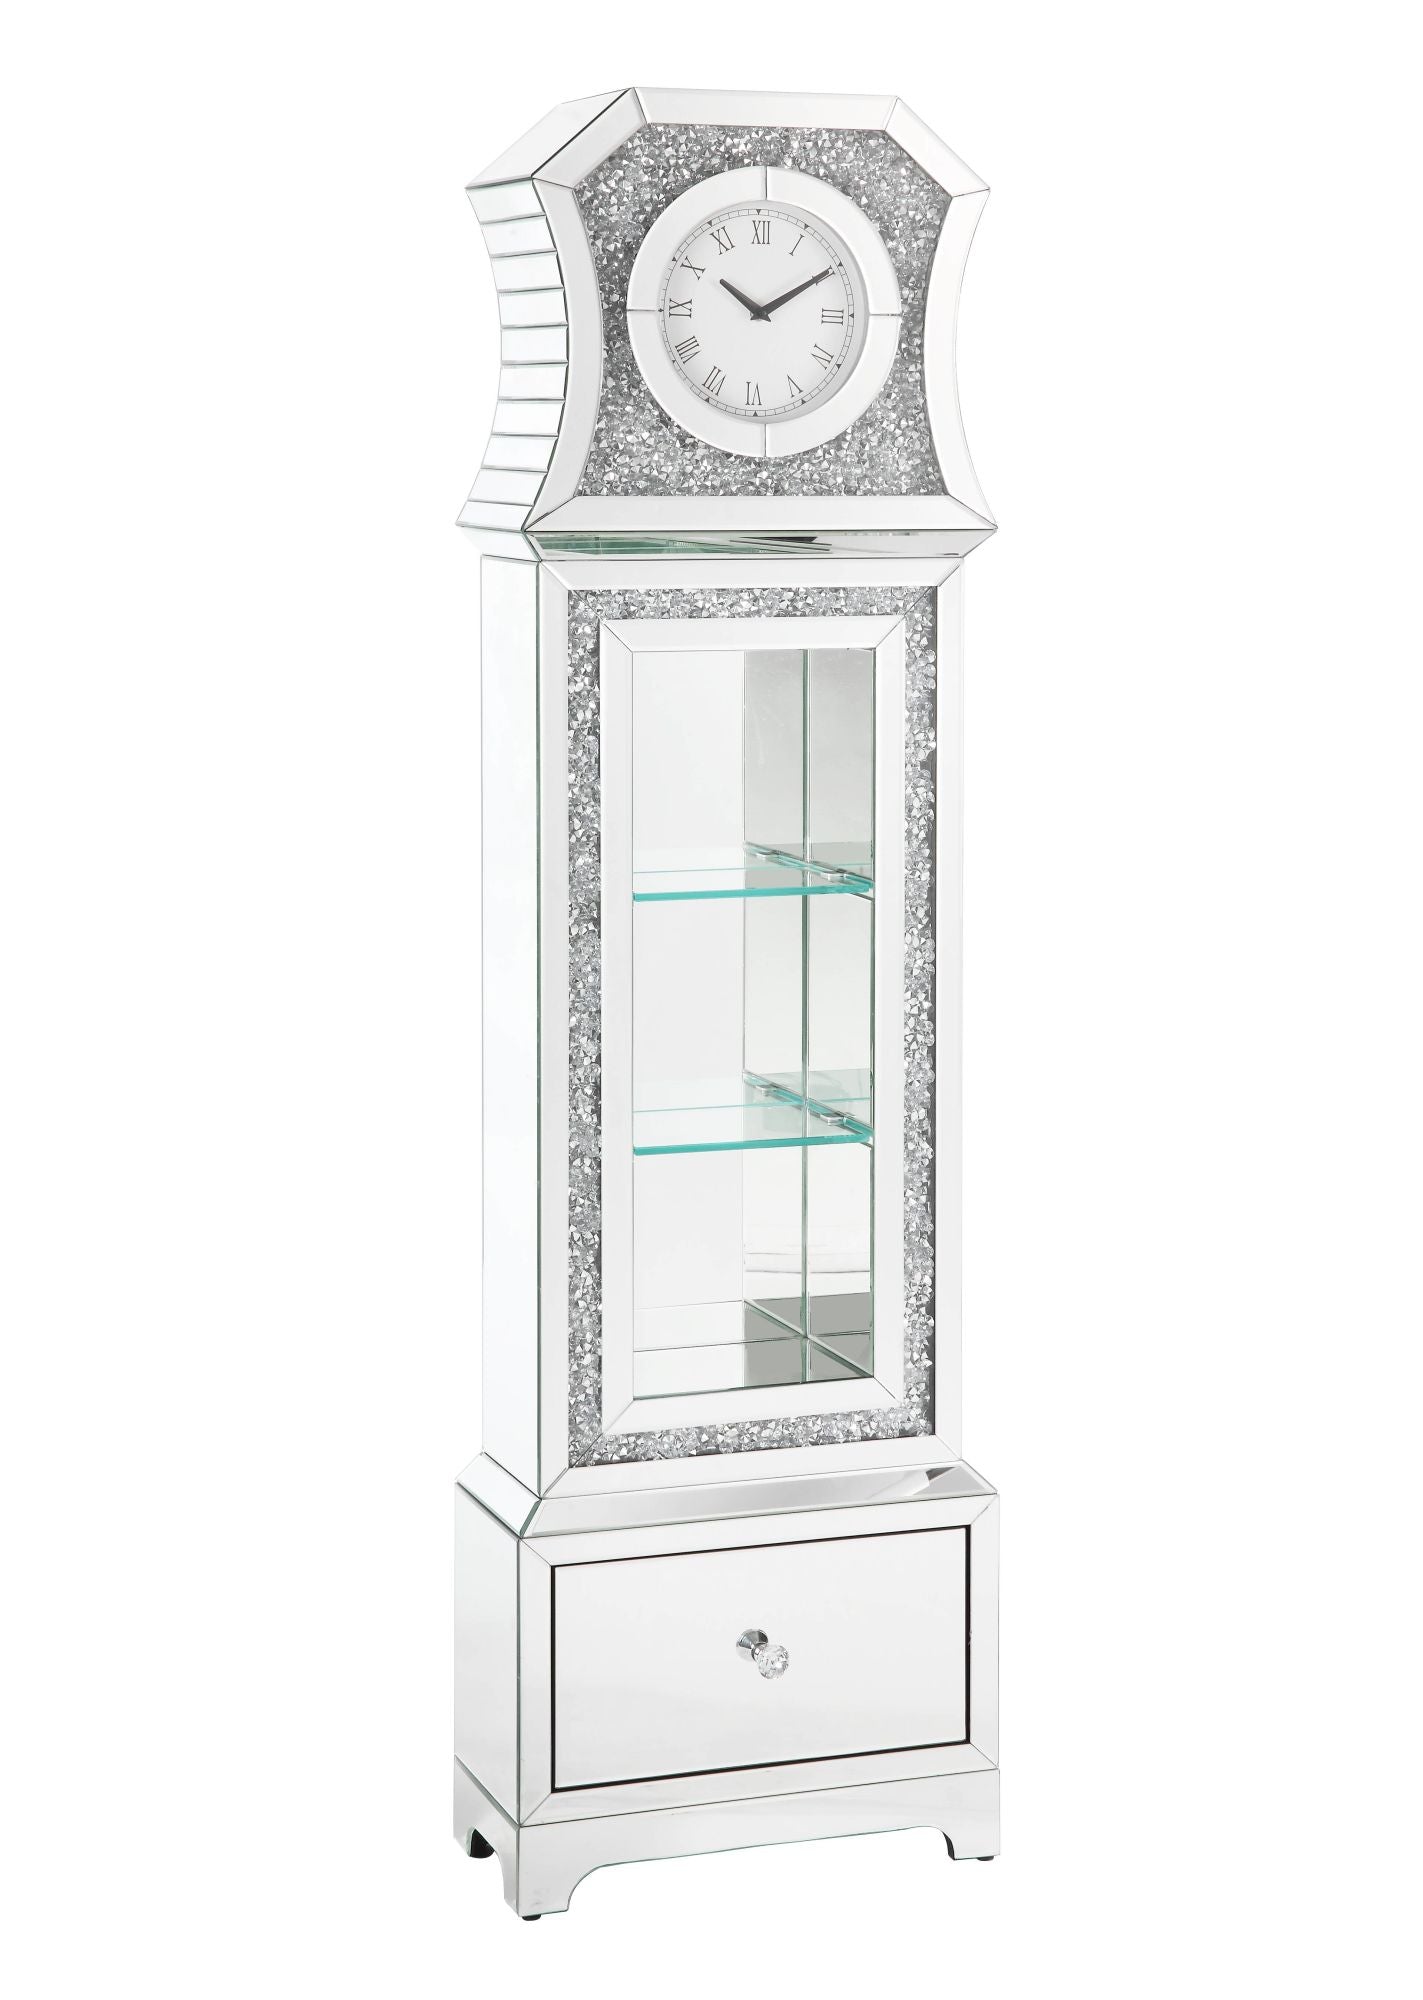 ACME Noralie GRANDFATHER CLOCK W/LED Mirrored & Faux Diamonds AC00350 Home Decor by Design